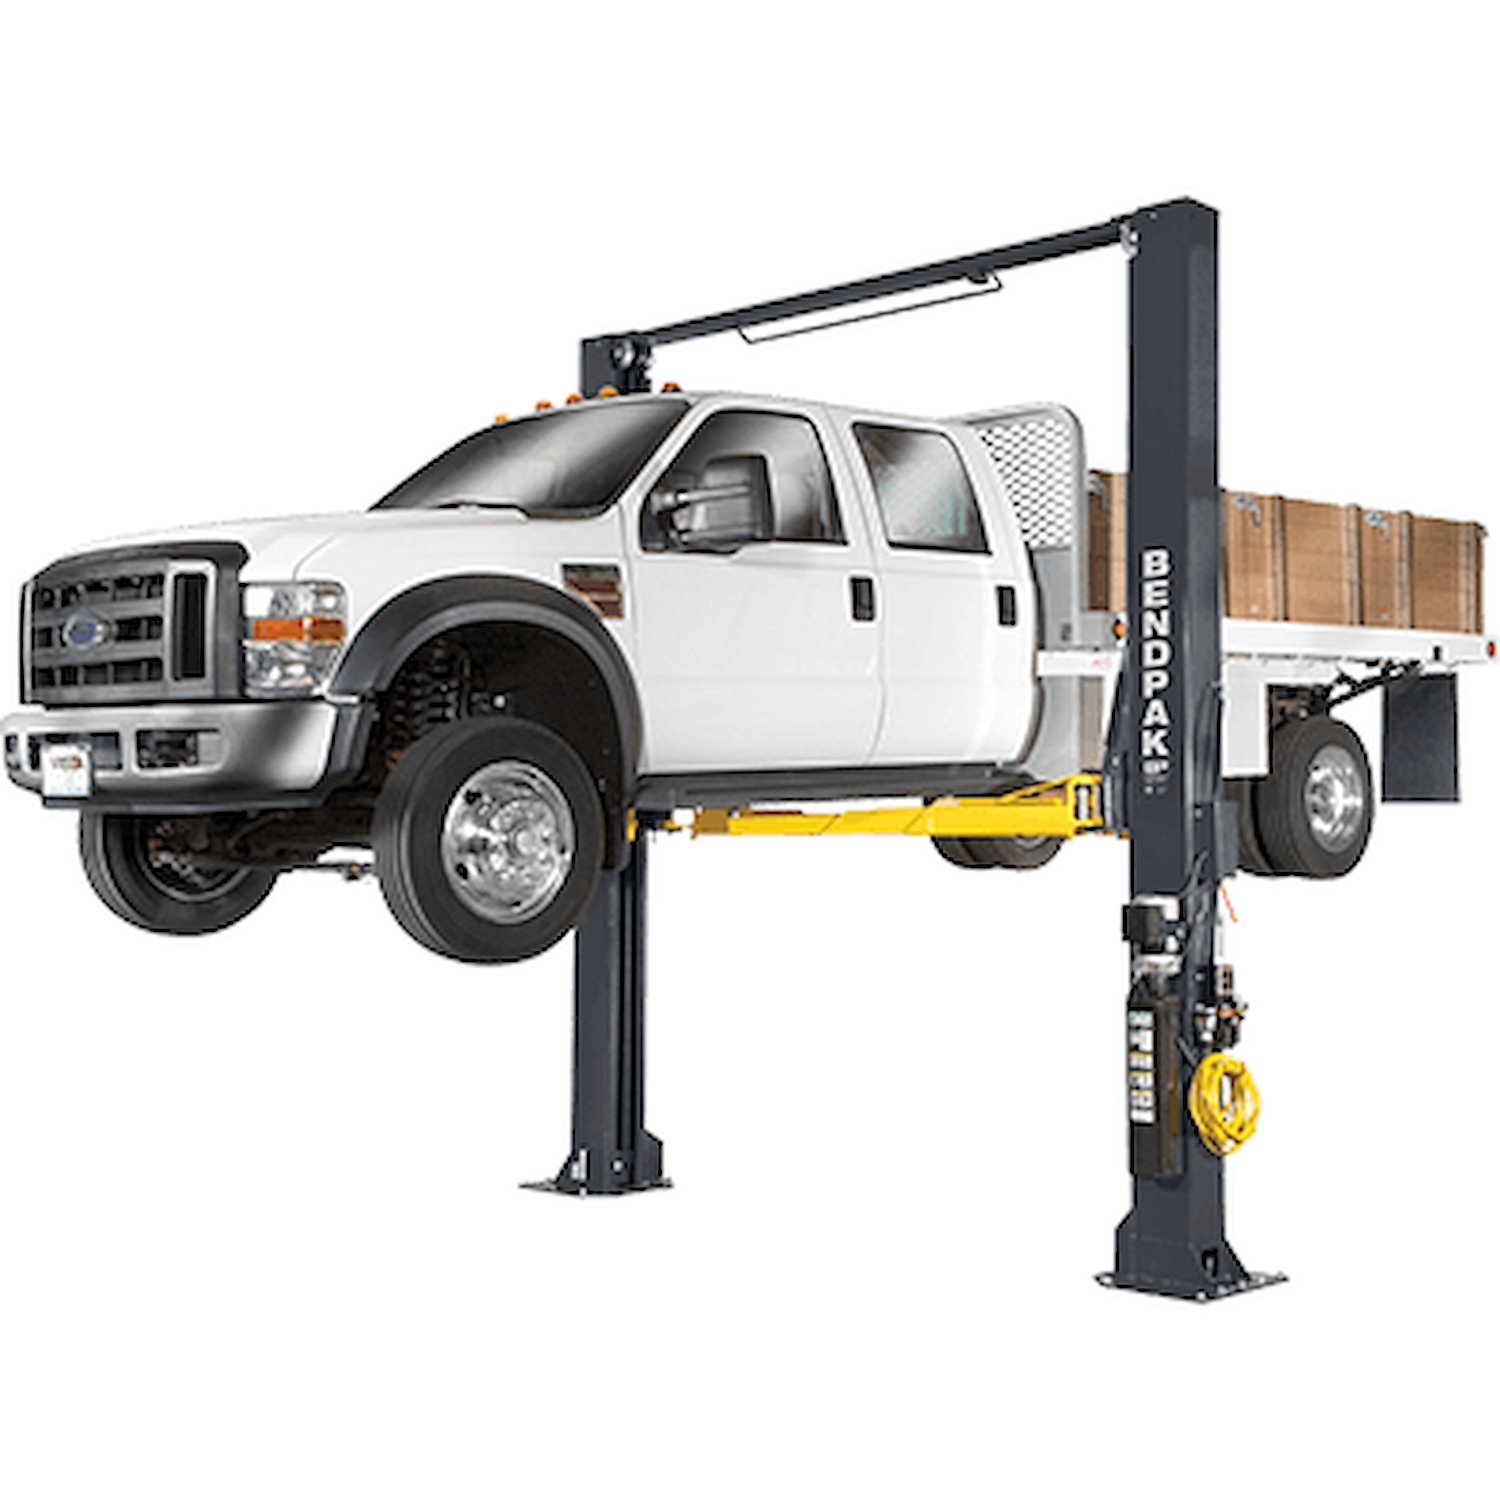 XPR-12CL Two-Post Lift, 12,000-lb. Capacity